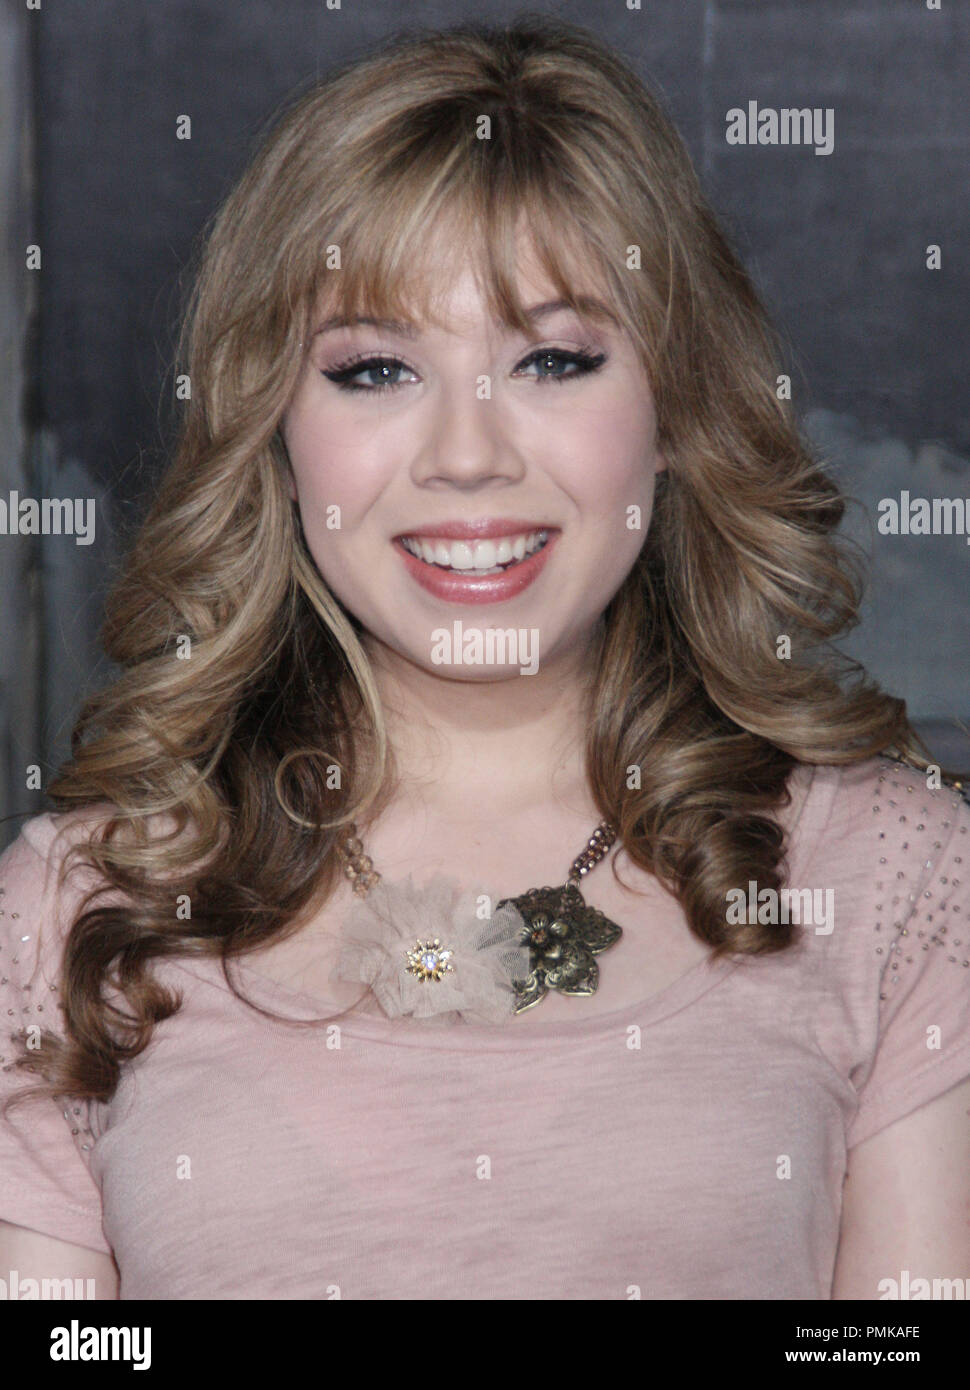 Jeannette McCurdy at the Los Angeles Premiere of RANGO held at the Regency Village Theatre in Los Angeles' Westwood area, CA on Monday, February 14, 2011. Photo by Pedro Ulayan Pacific Rim Photos / PictureLux Stock Photo